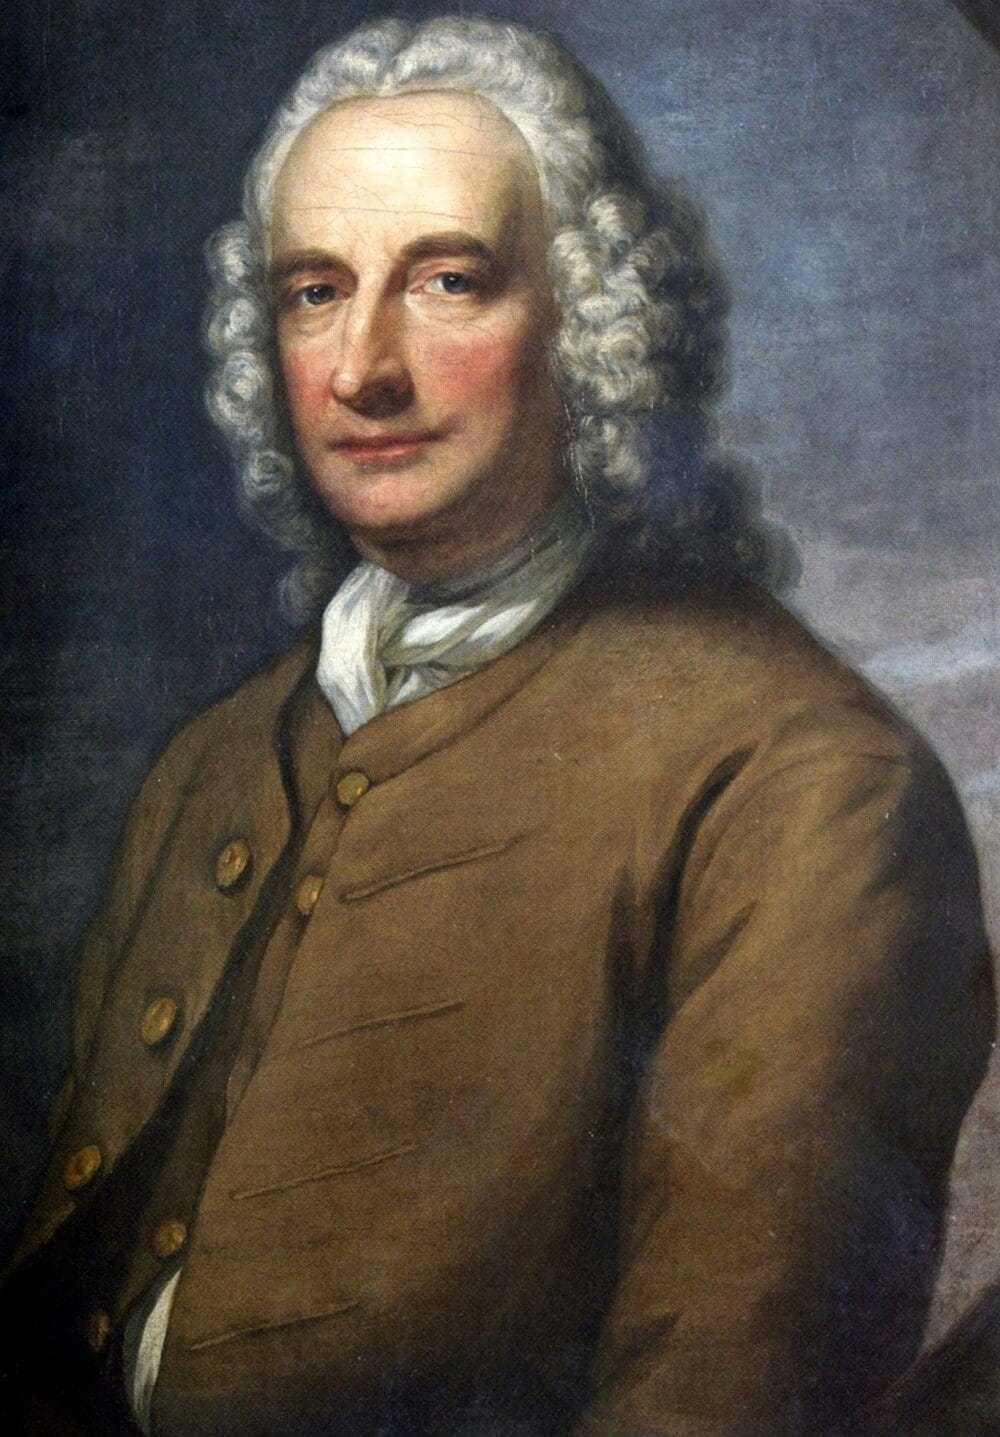 ralph-allen-1693-1764-he-built-and-lived-at-prior-park